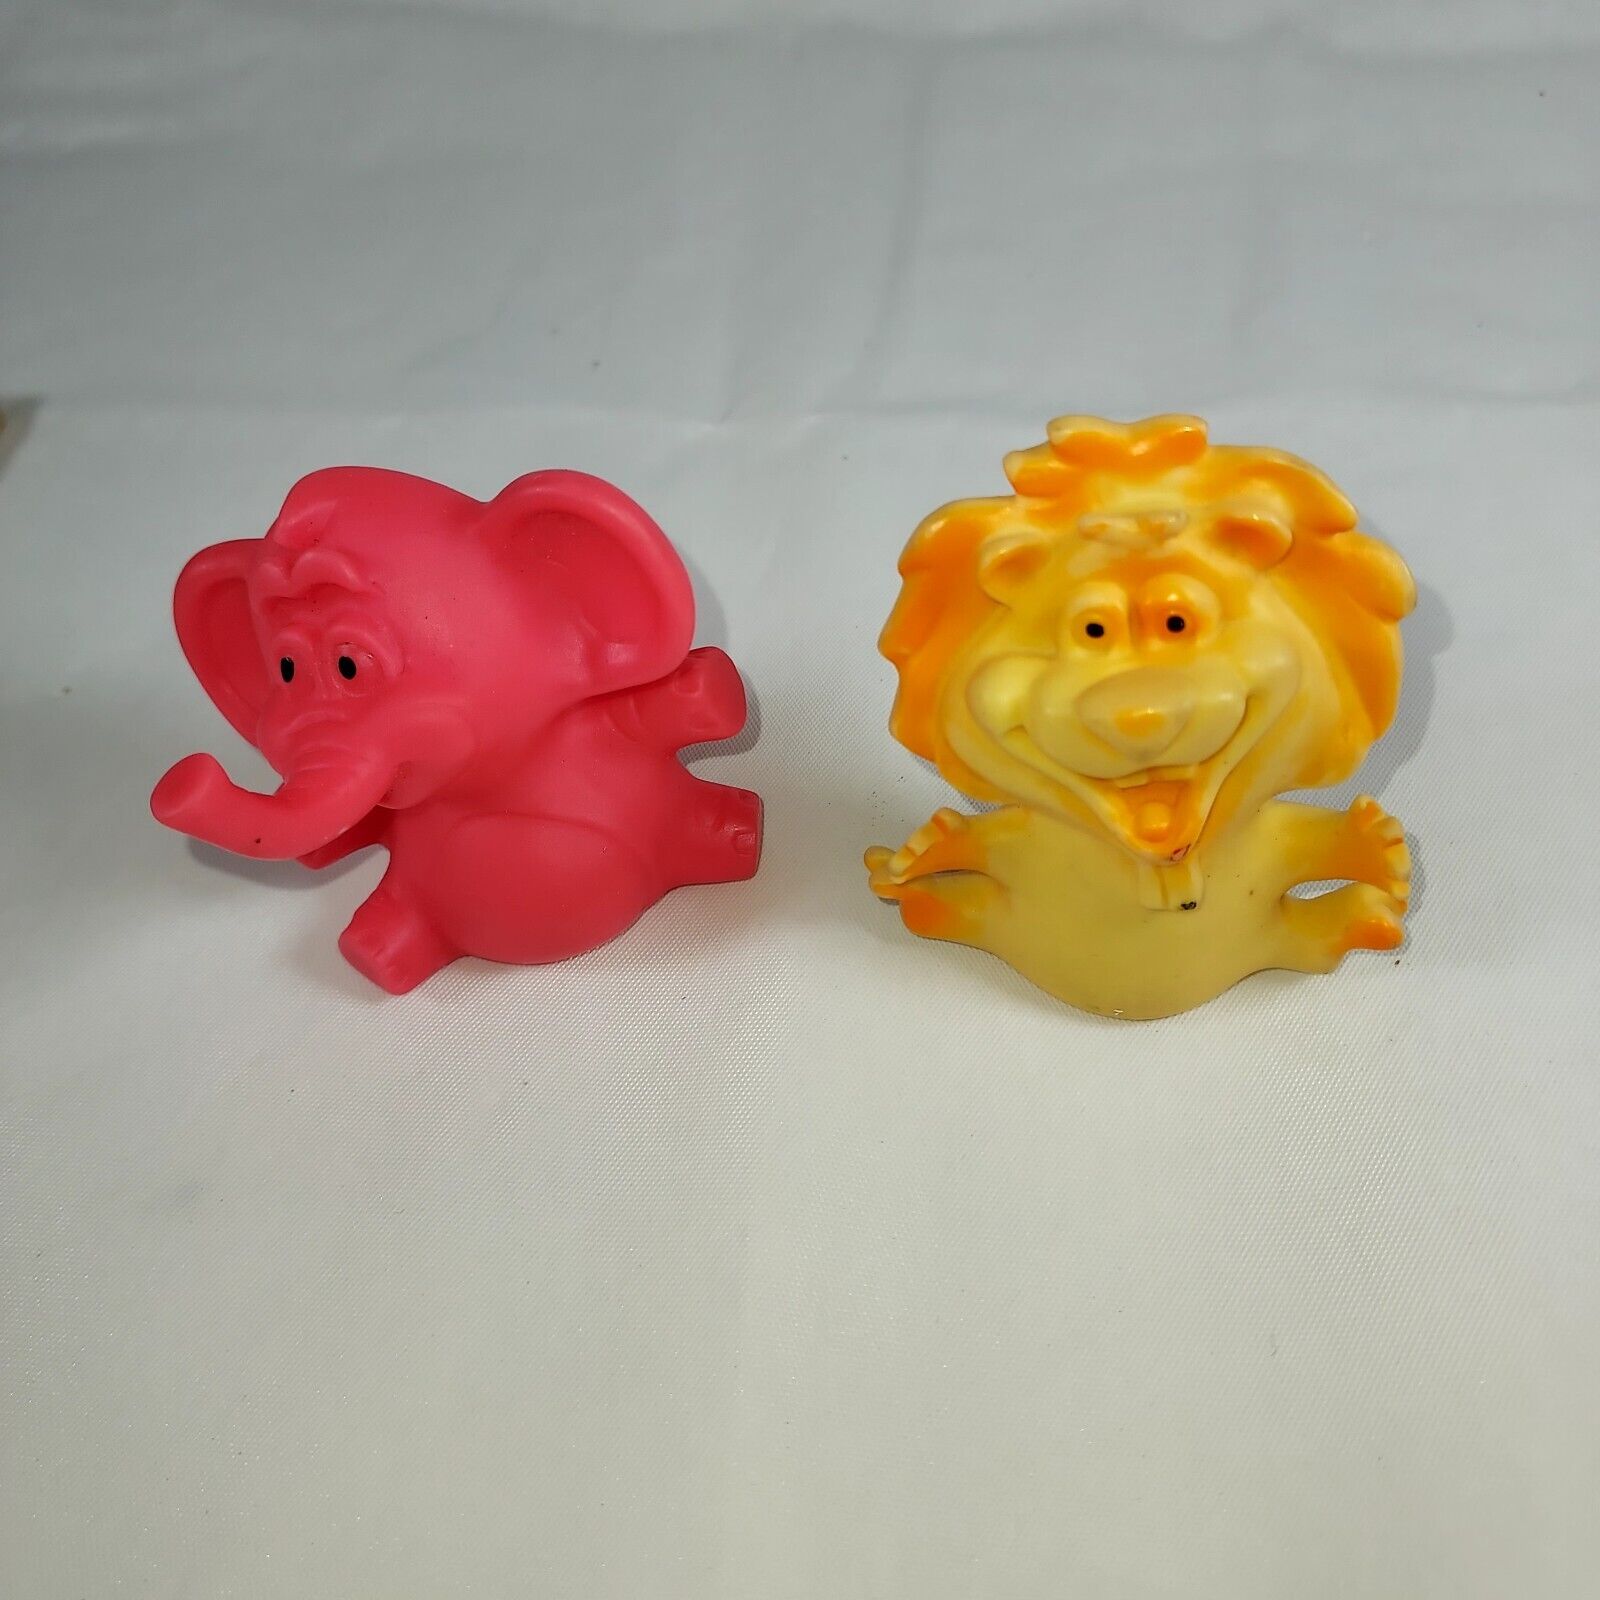 Vtg 1970s Crest Toothpaste Rubber Finger Puppets Set Of 2 Cute-- in great shape